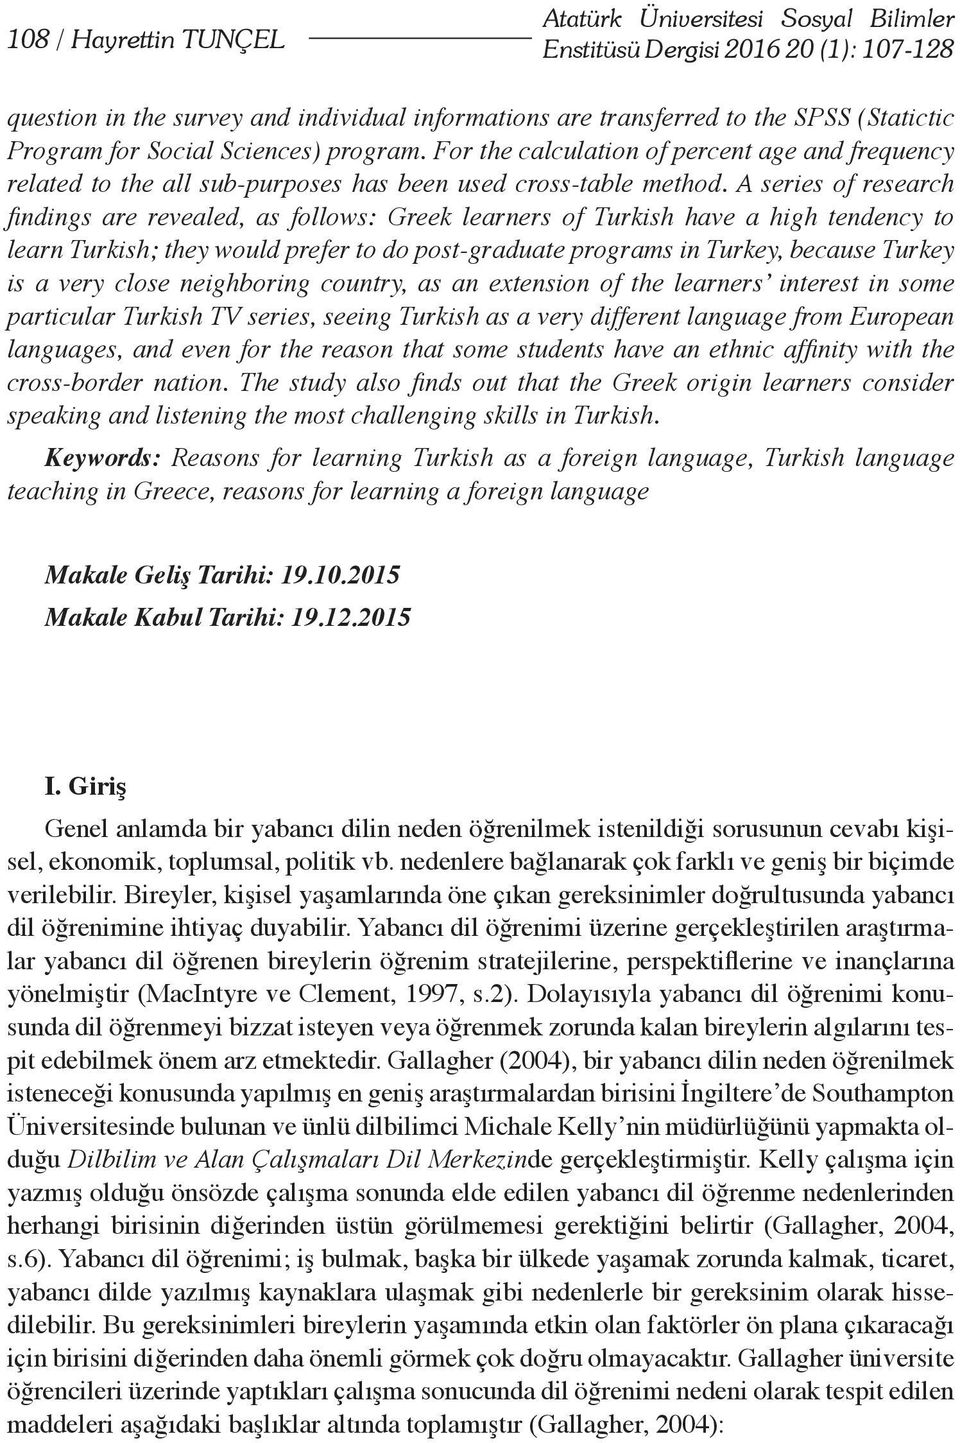 A series of research findings are revealed, as follows: Greek learners of Turkish have a high tendency to learn Turkish; they would prefer to do post-graduate programs in Turkey, because Turkey is a